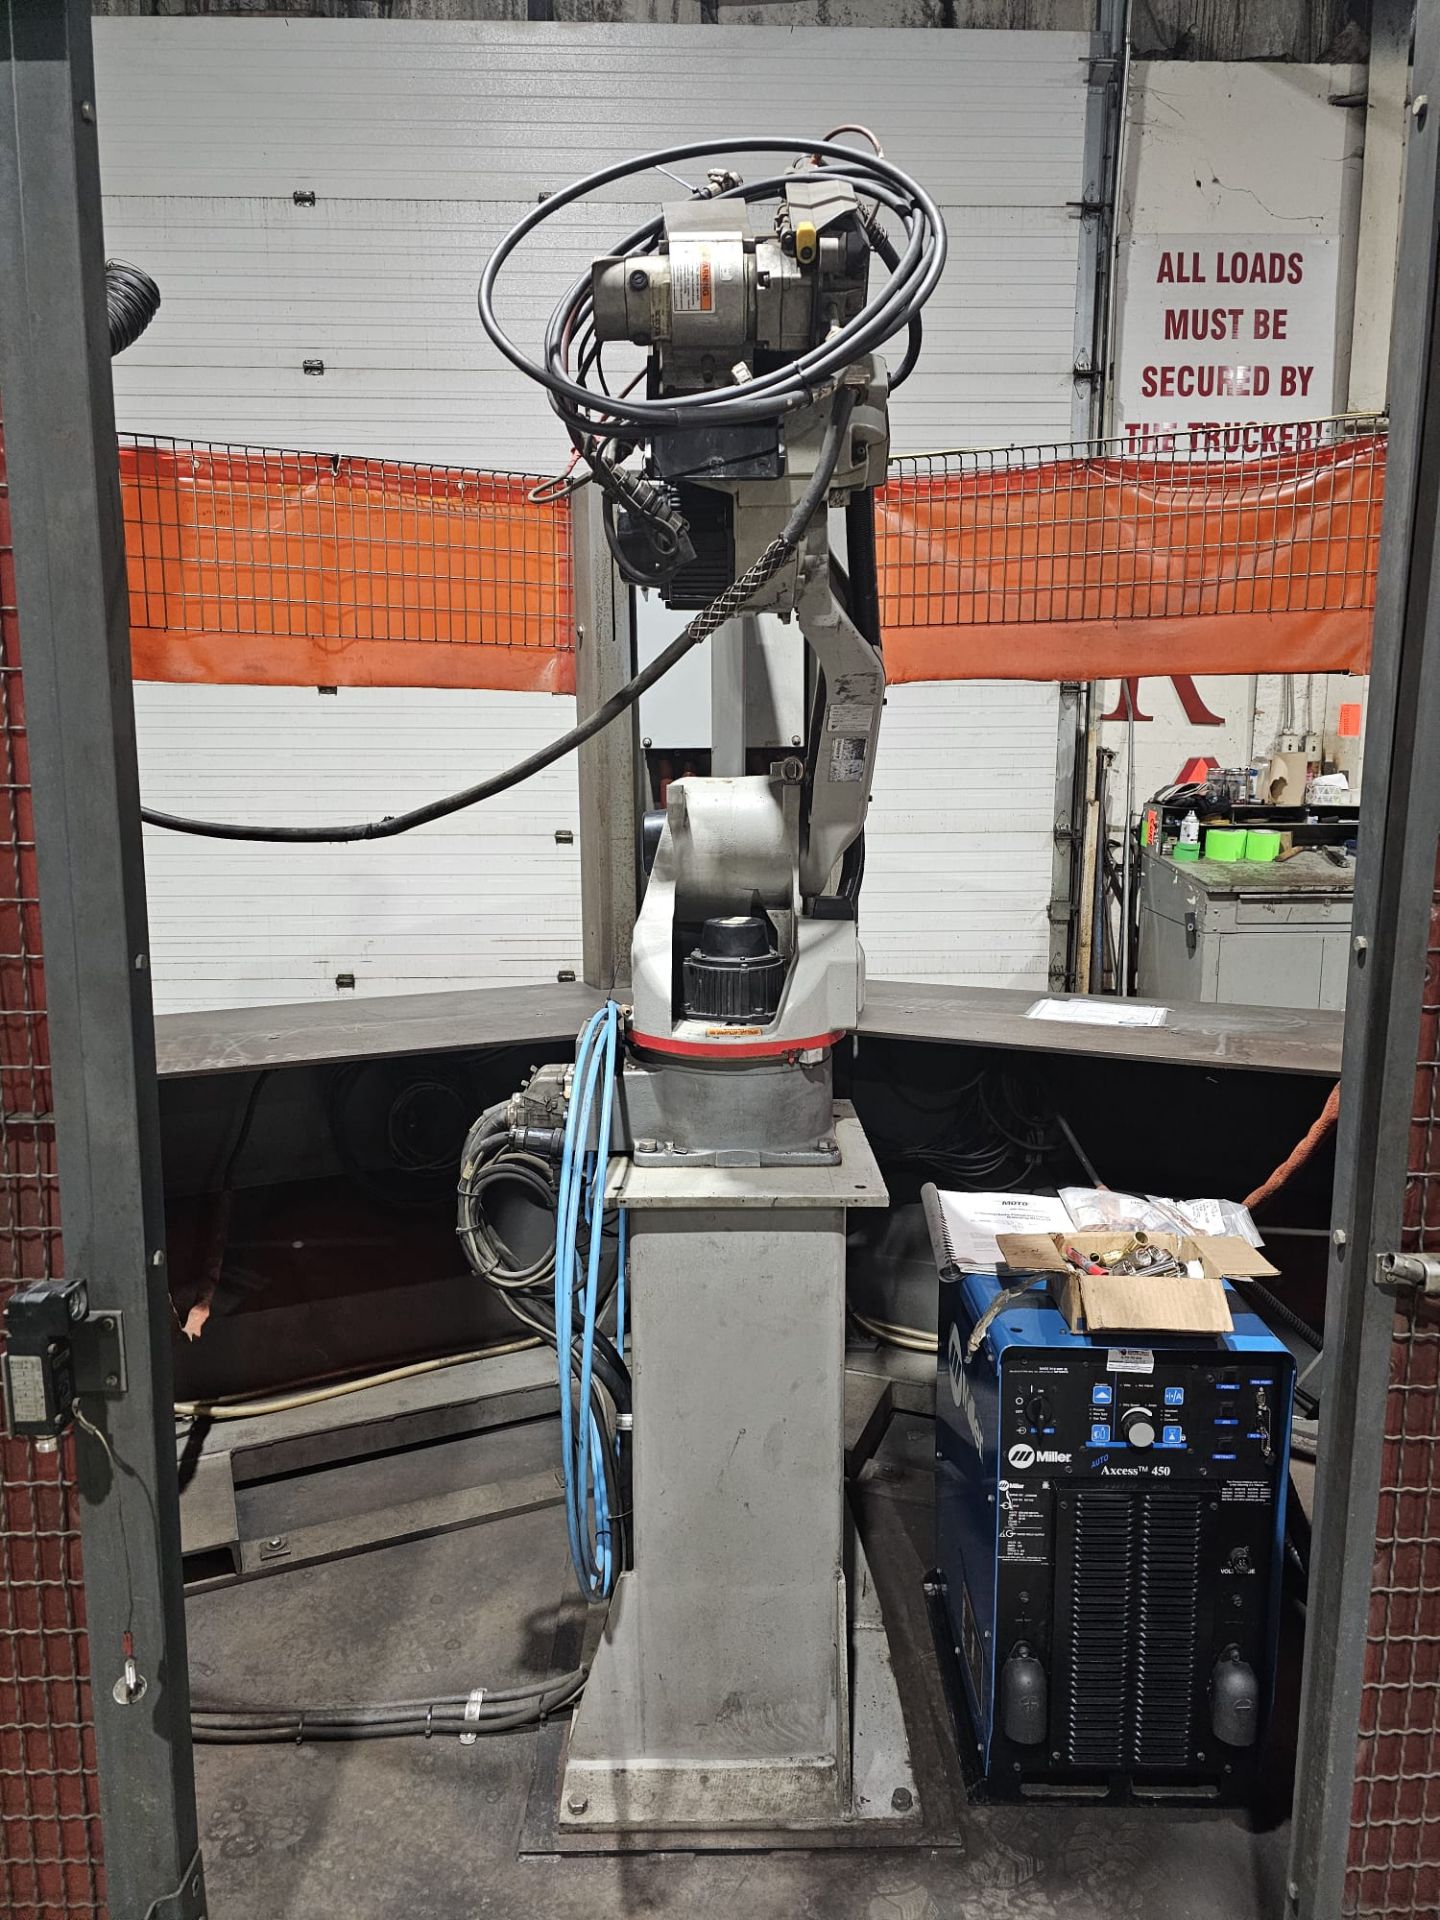 Motoman Model UP-6 Welding Robot Cell with Yasnac Controller, Miller Axcess 450 Welder Tip Cleaner - Image 11 of 26